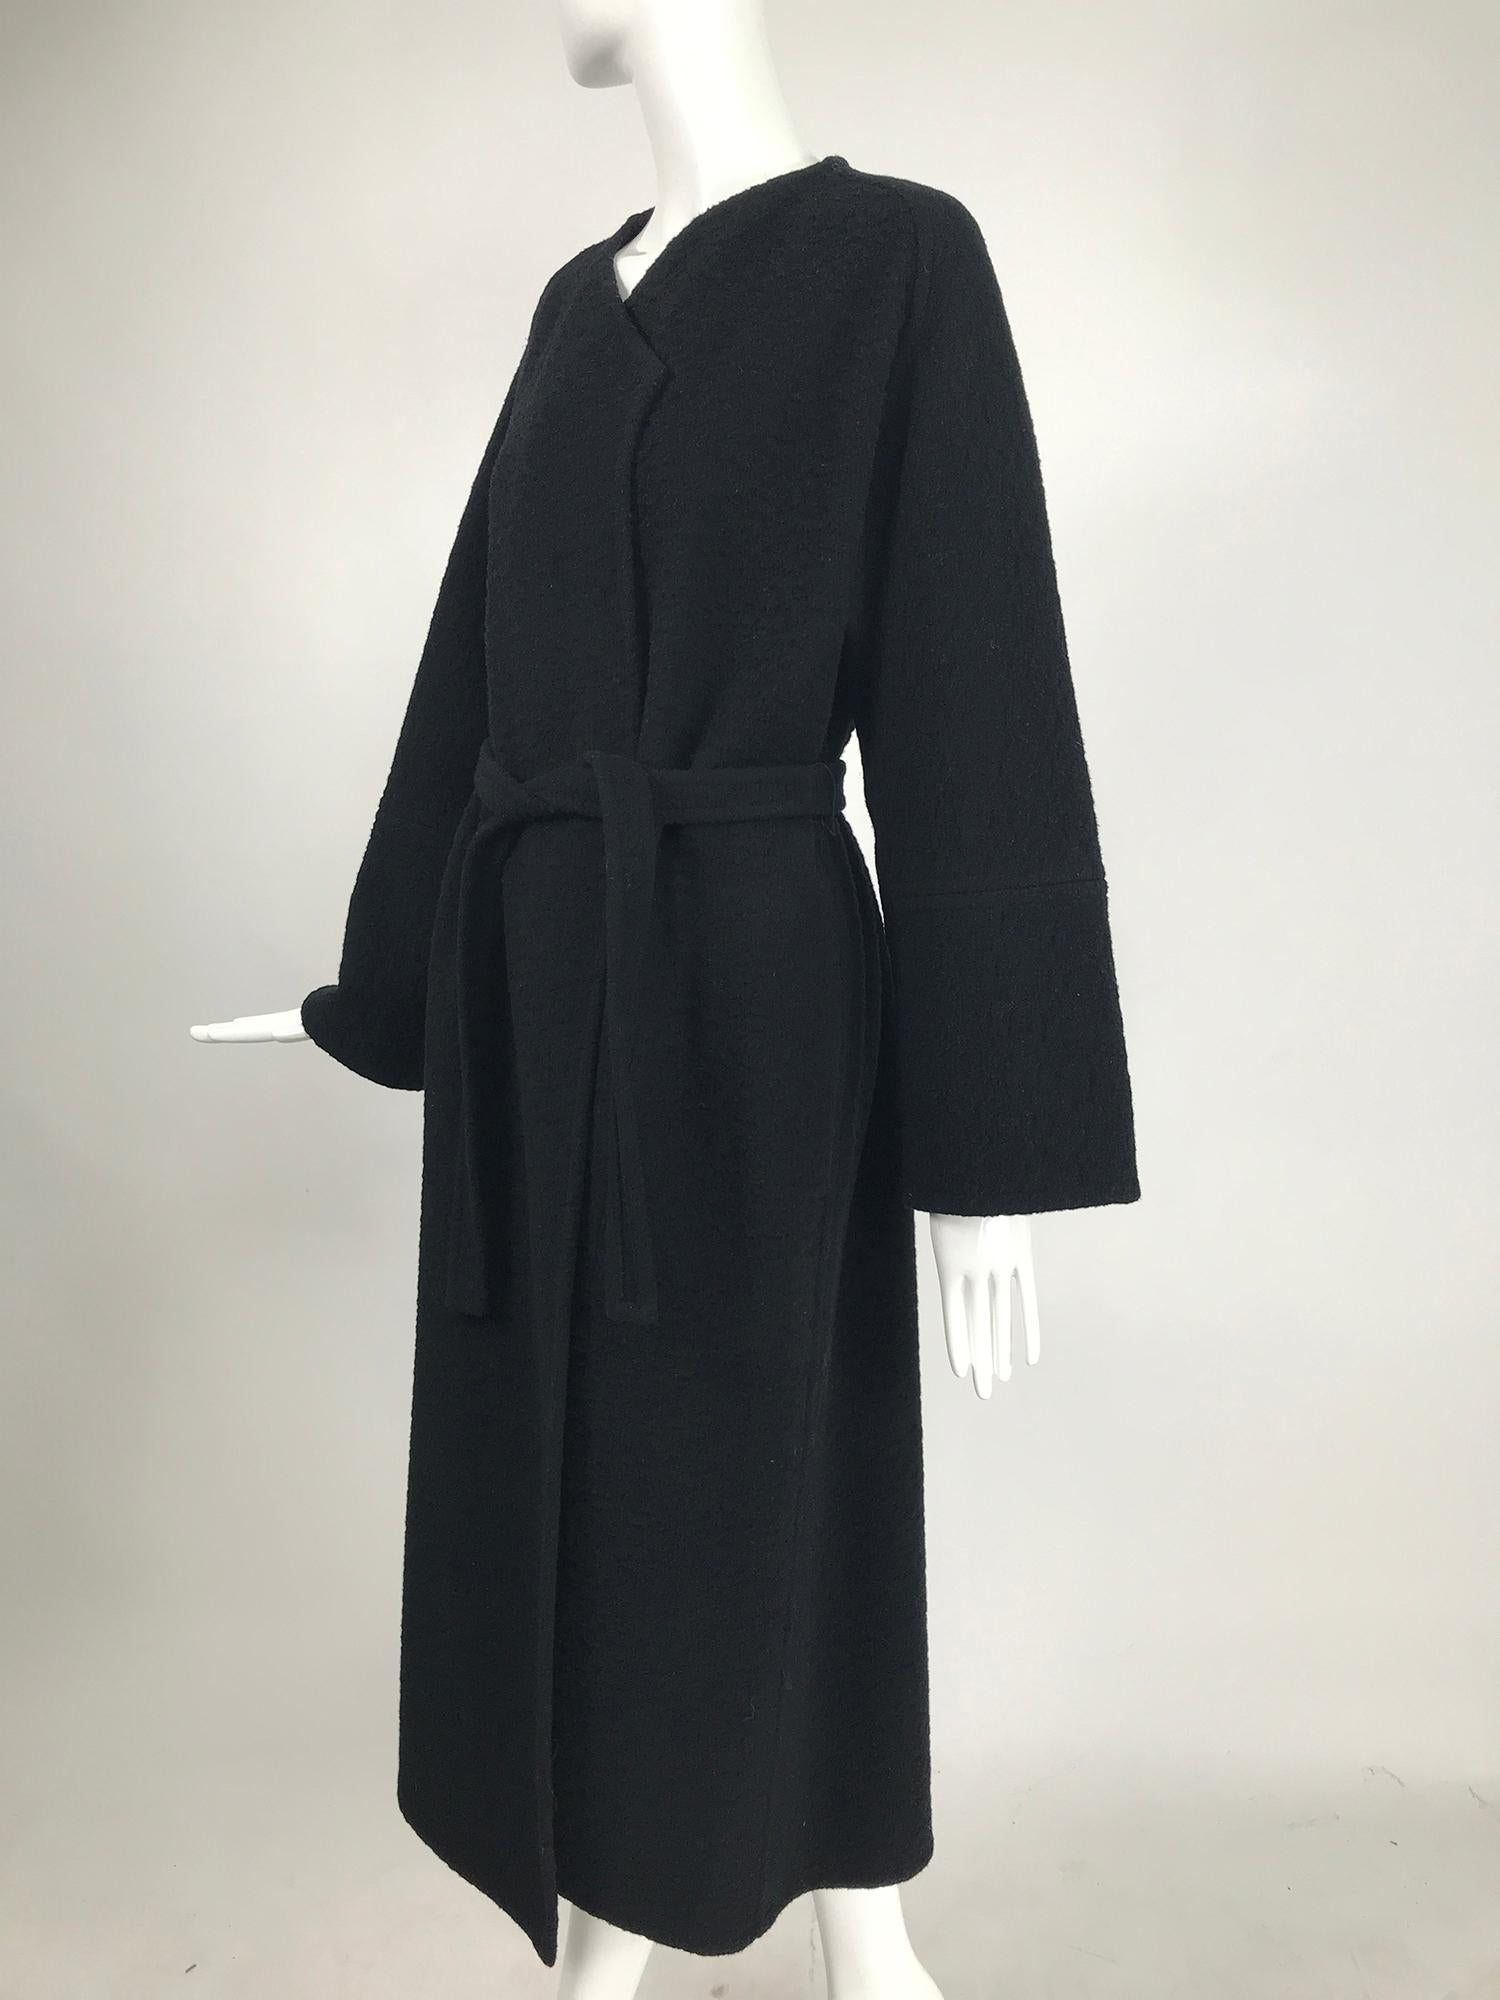 Vintage Yeohlee Black Textured Double Face Wool Wrap Coat 1990s For Sale 6